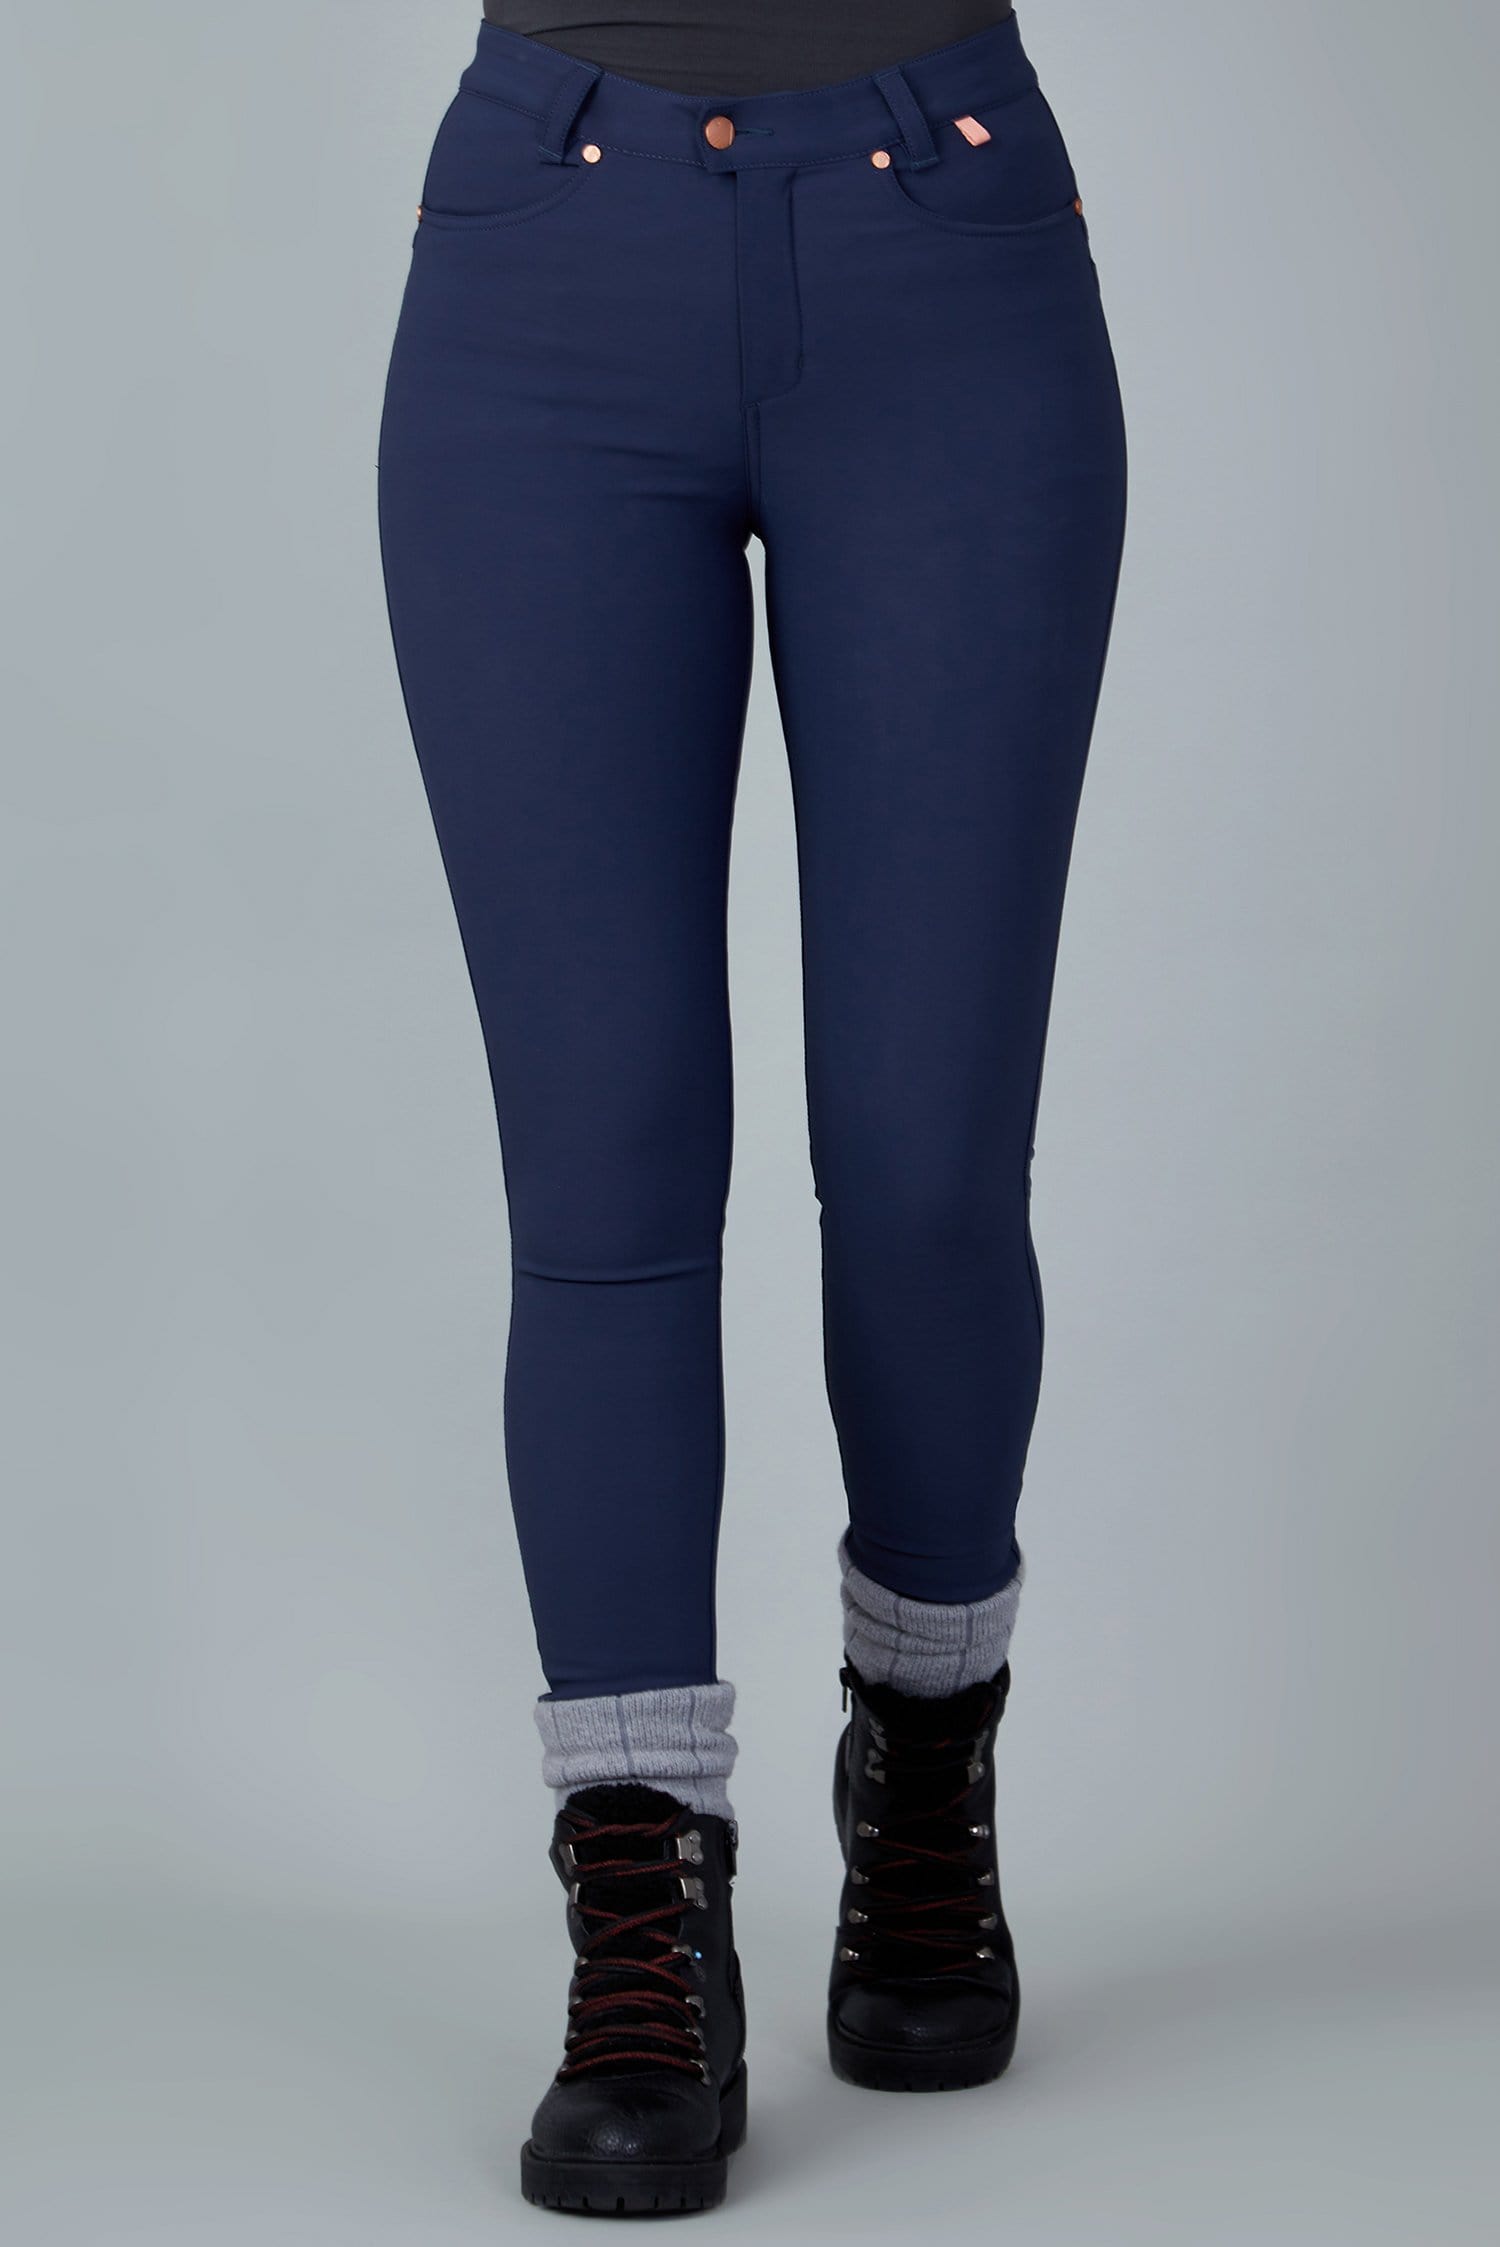 The Aventurite Stretch Skinny Outdoor Trousers - Midnight Blue - 24r / Uk6 - Womens - Acai Outdoorwear